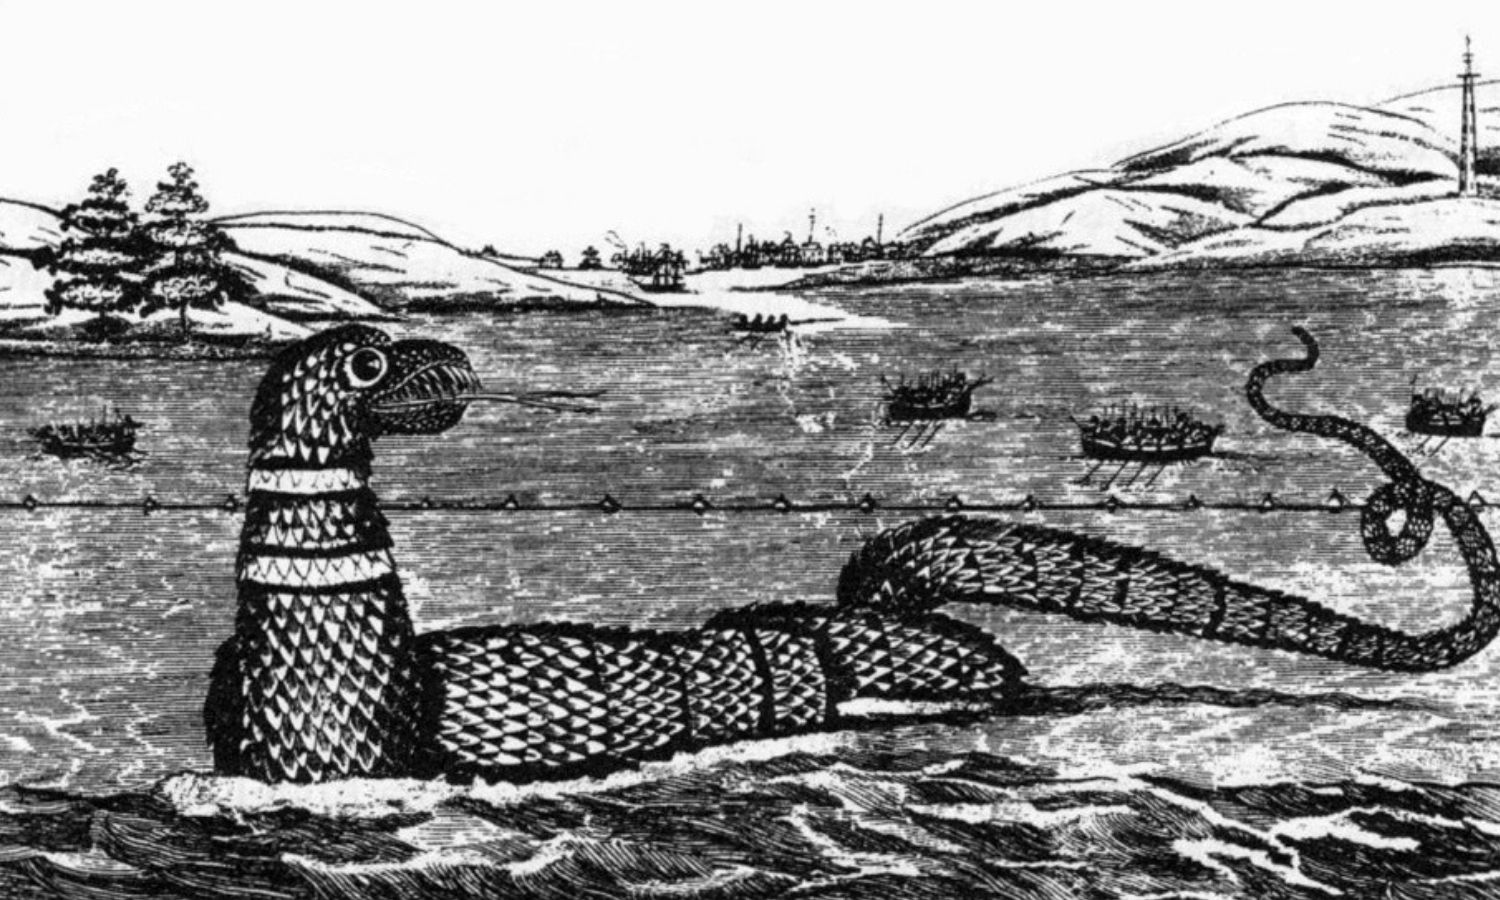 OTD in 1817: There were sightings of a giant sea serpent in Gloucester